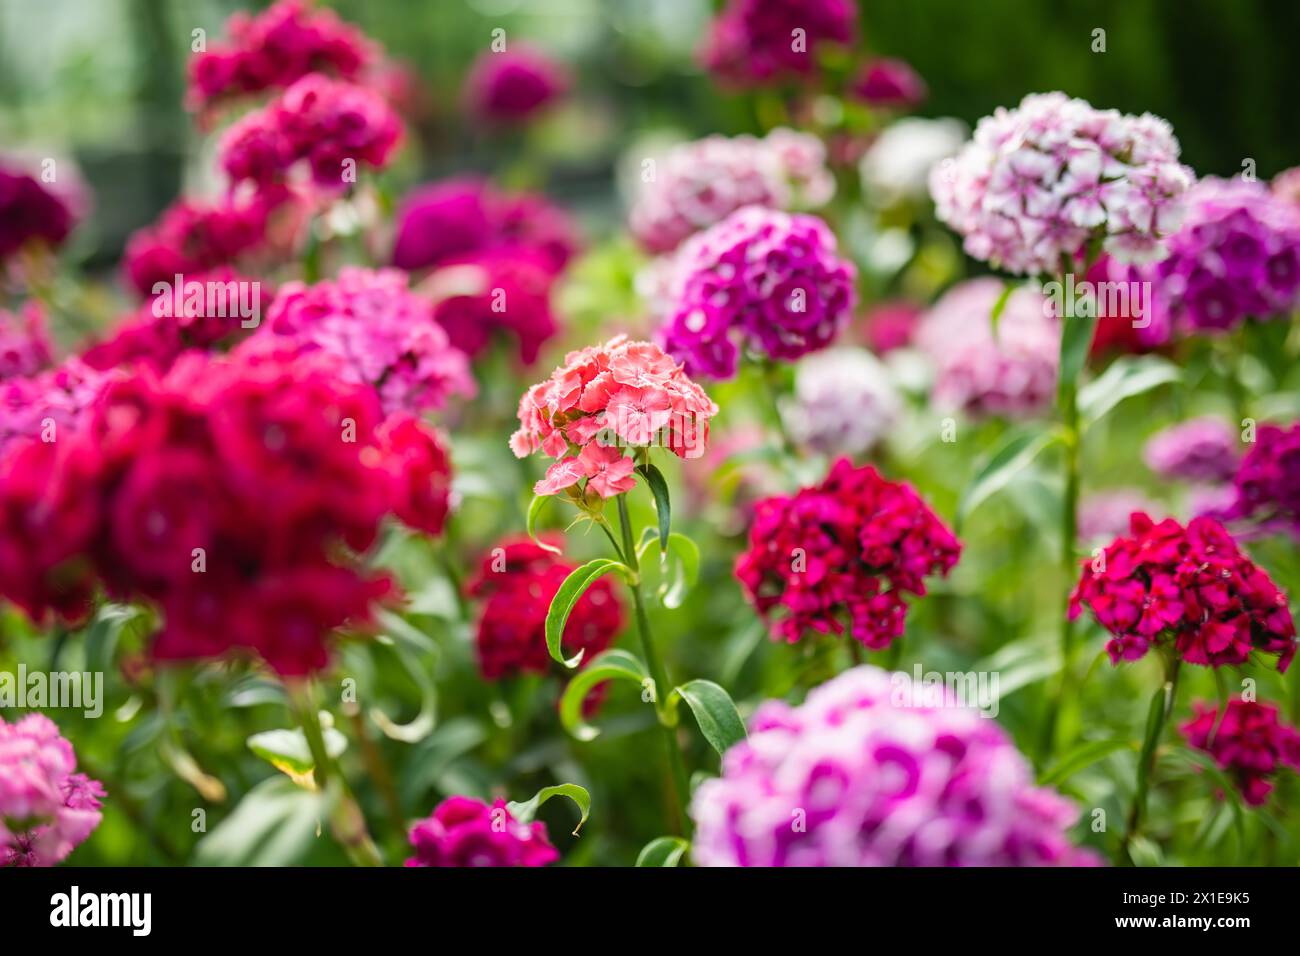 Assorted colorful flowers of Dianthus barbatus or the sweet William plant blossoming in a garden in a sunny summer day. Beauty in nature. Stock Photo